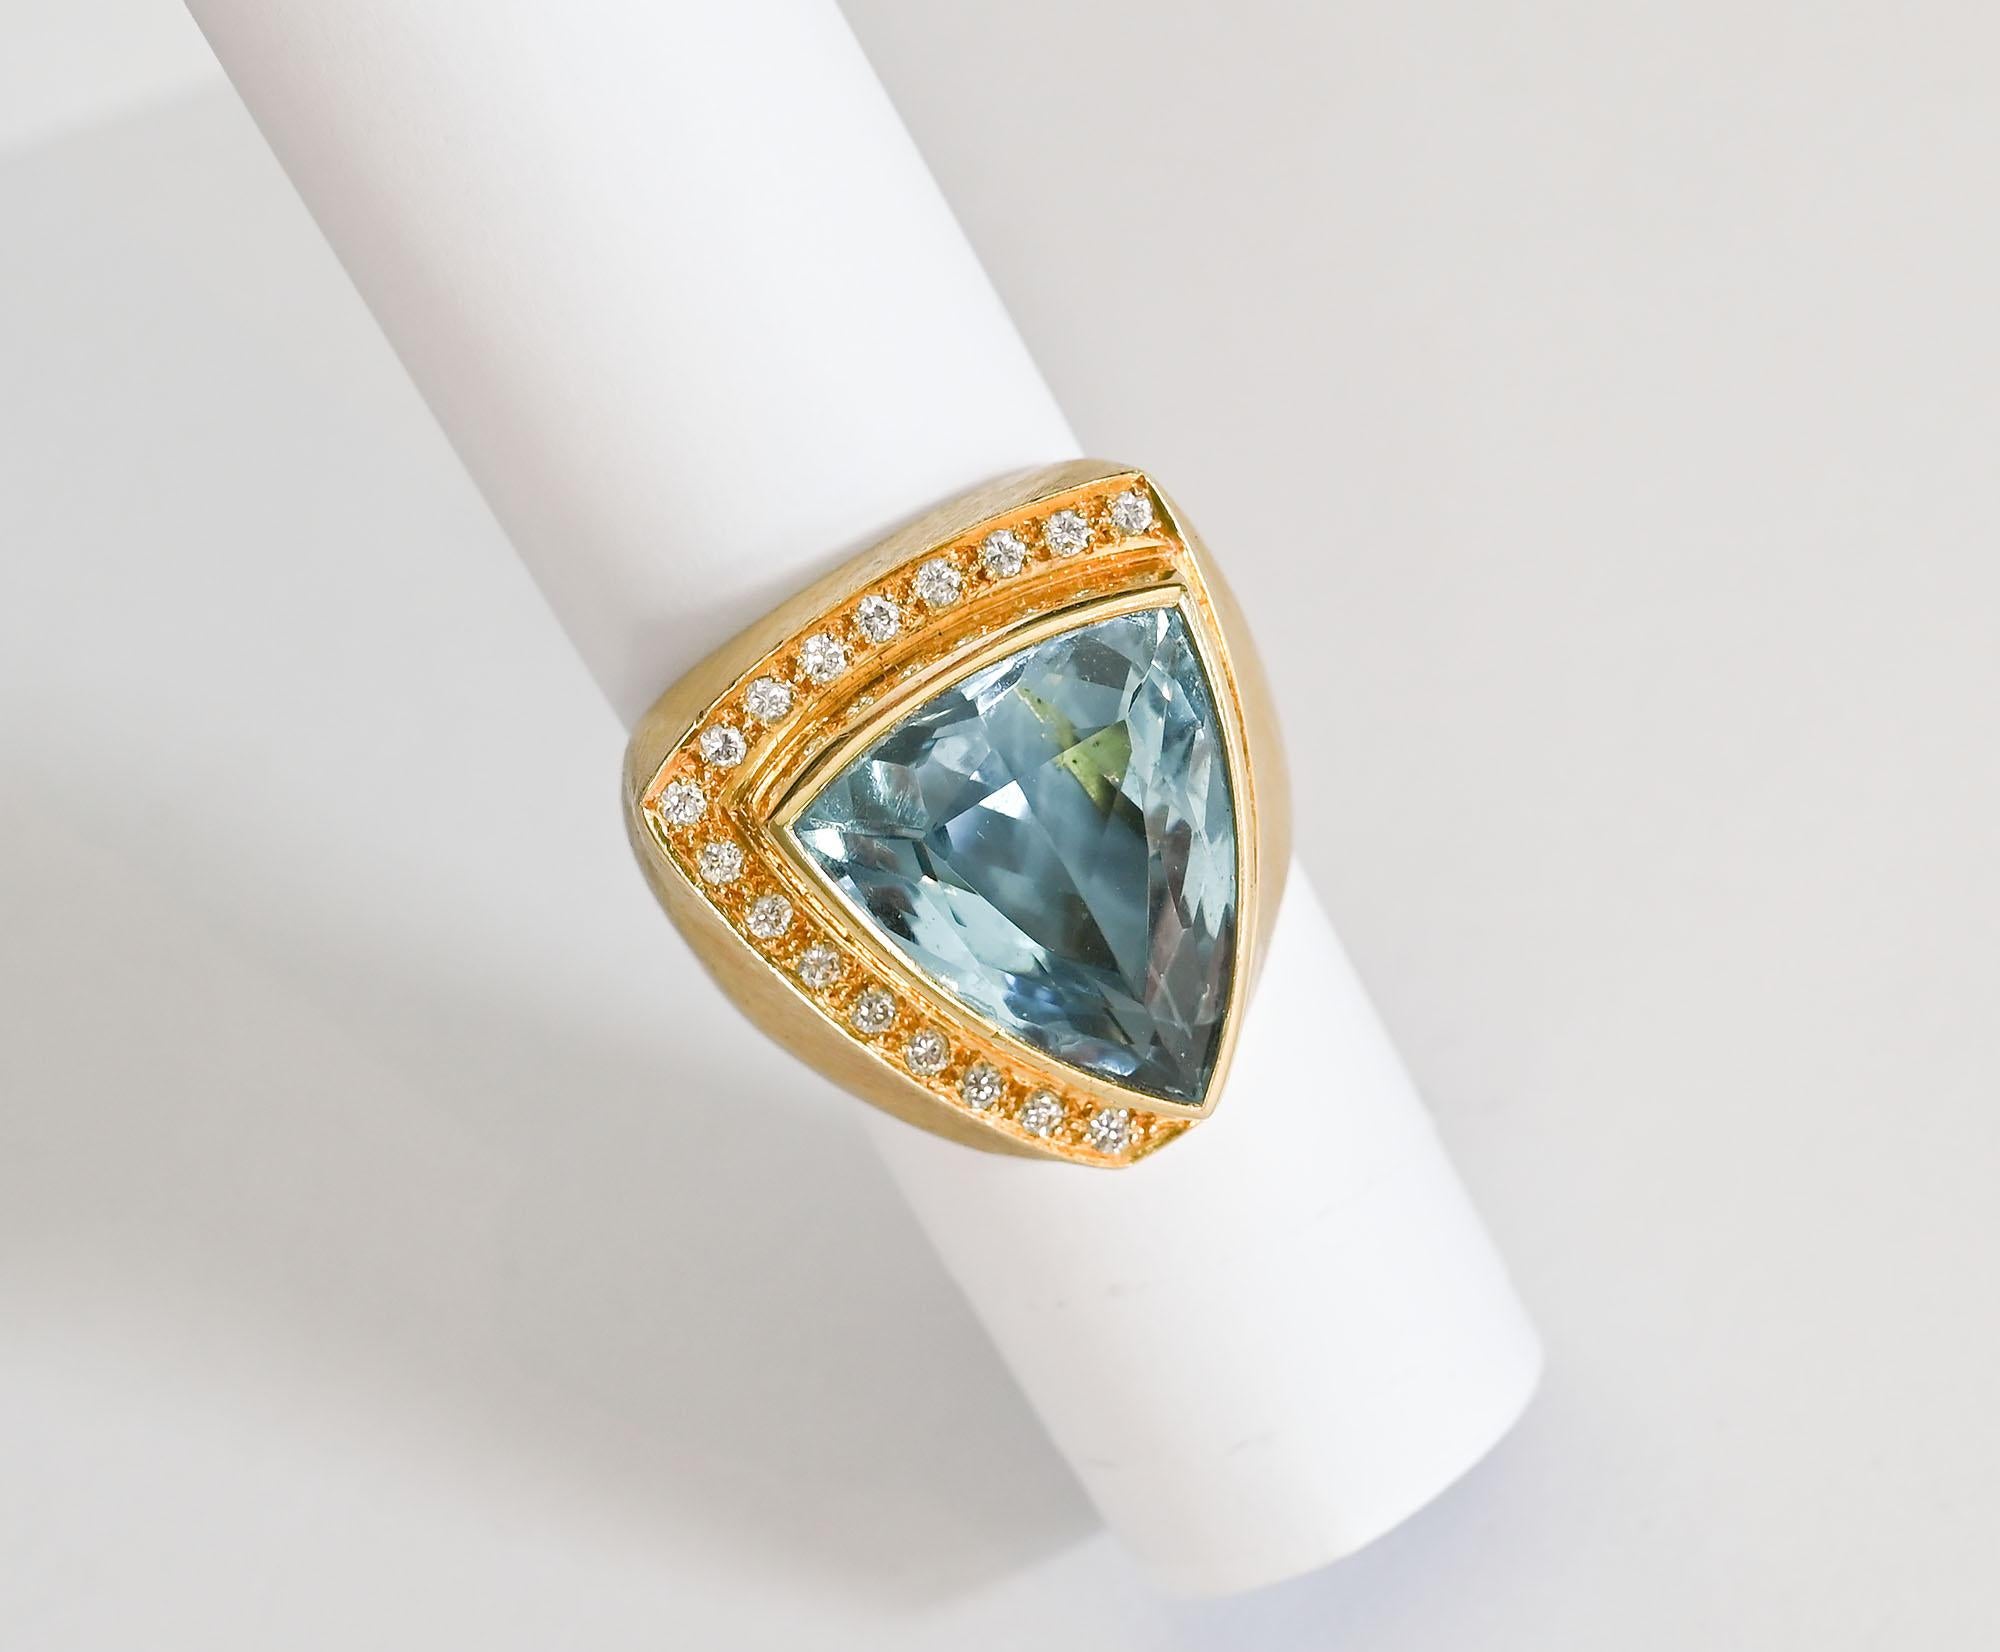 Powerfully designed blue topaz ring by Brazil's most well known jewelry designer, Roberto Burle Marx. Thie ring has a 20 carat blue topaz surrounded with diamonds on two sides. The gold has the lightly brushed finish favored by Marx. The triangular